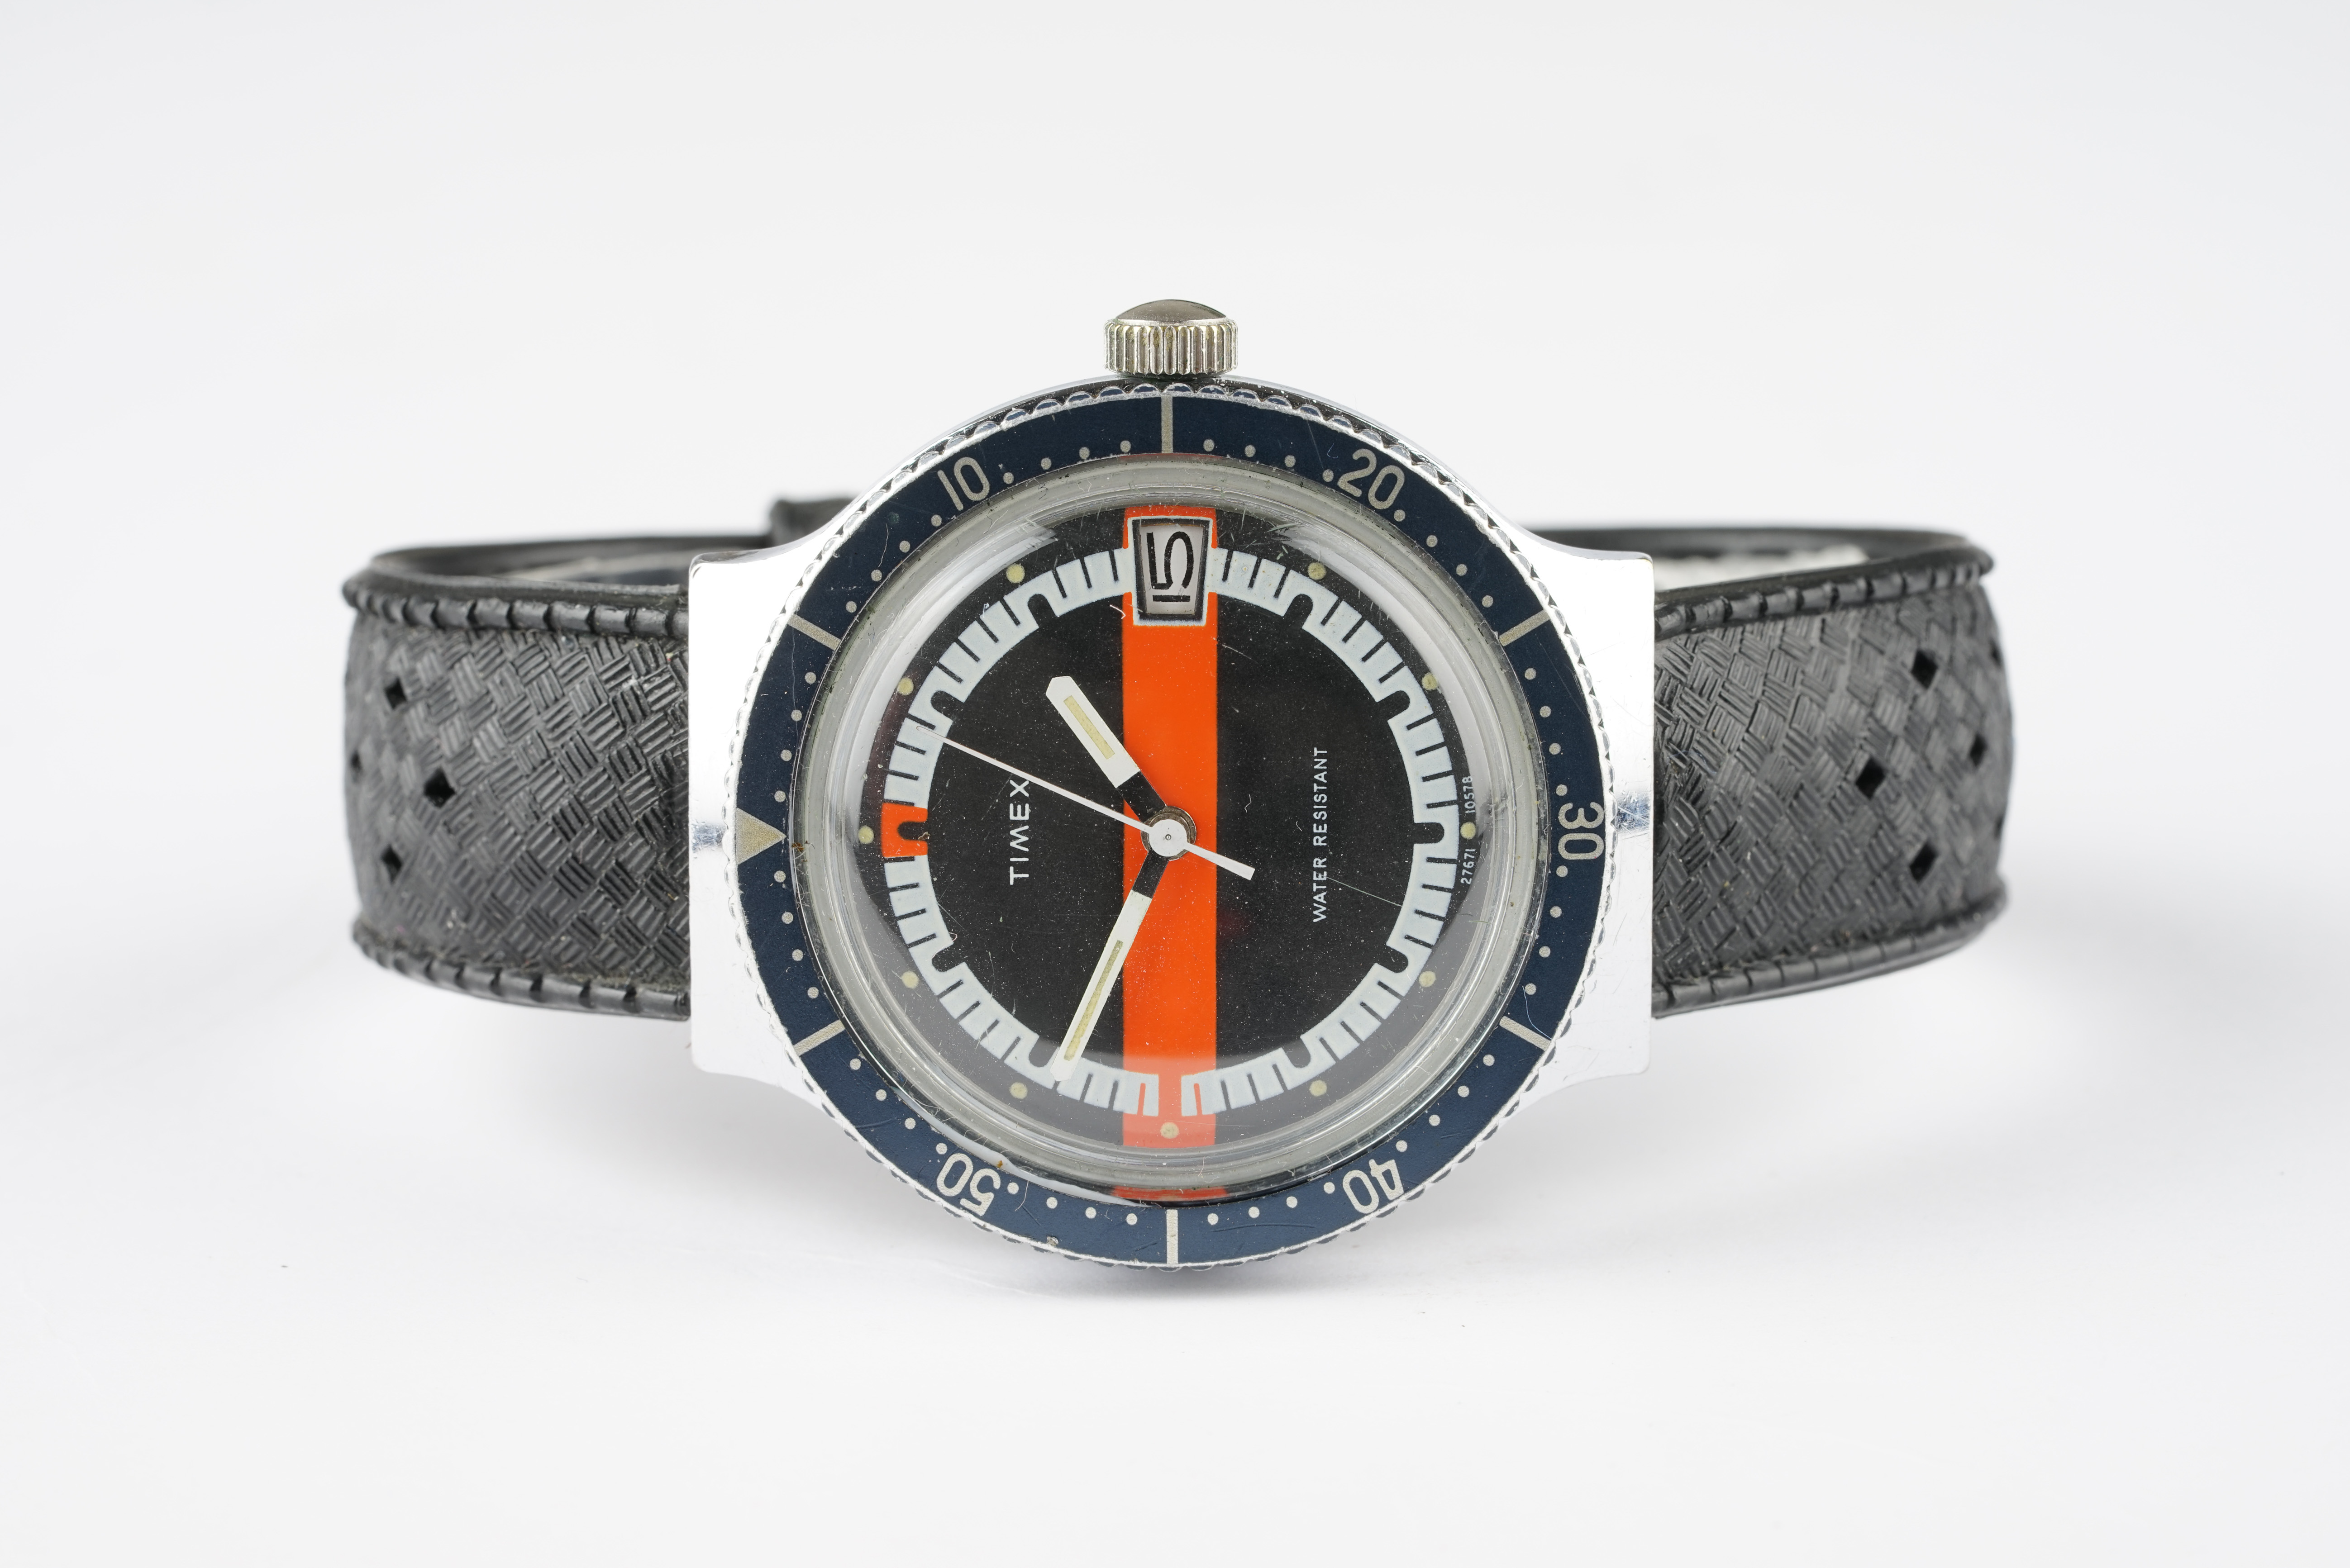 GENTLEMENS TIMEX DIVER DATE WRISTWATCH, circular black dial with orange accents, dot hour markers